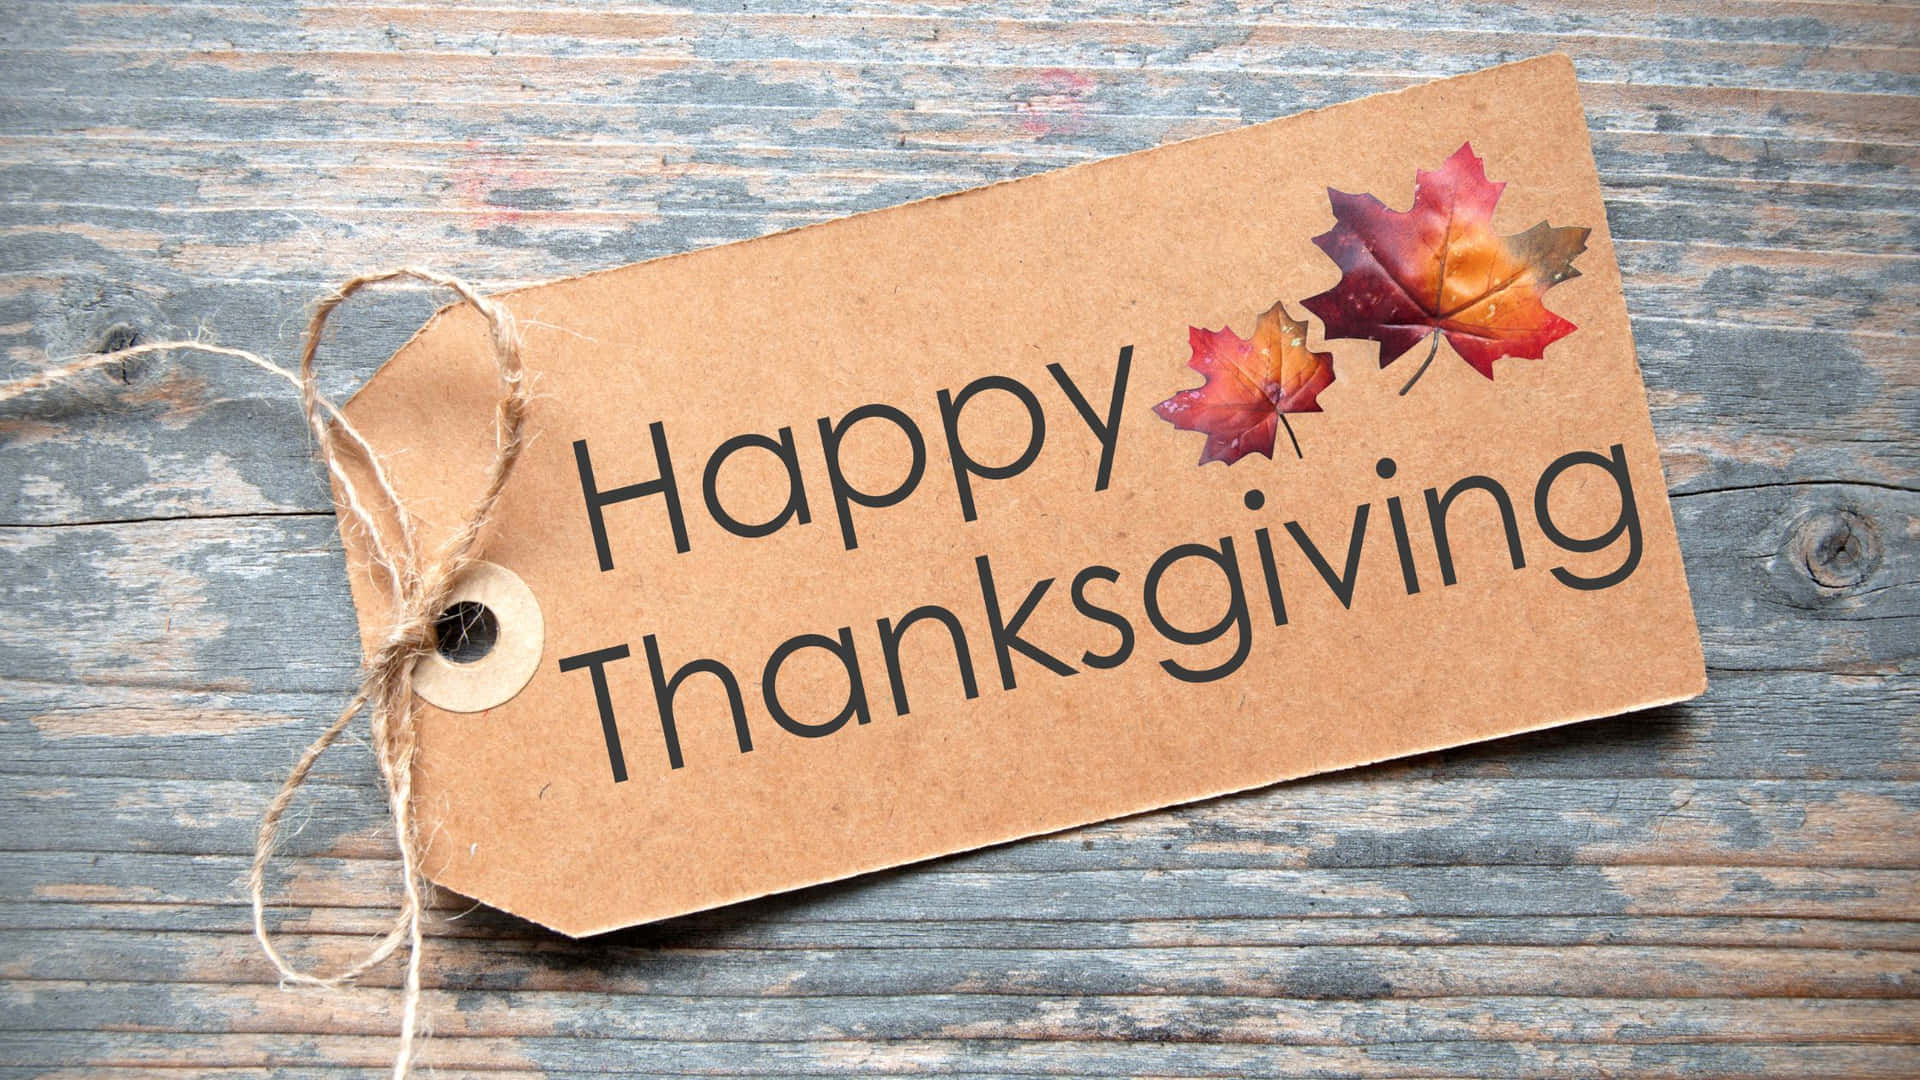 Happy Thanksgiving Tag With Leaves On A Wooden Background Wallpaper